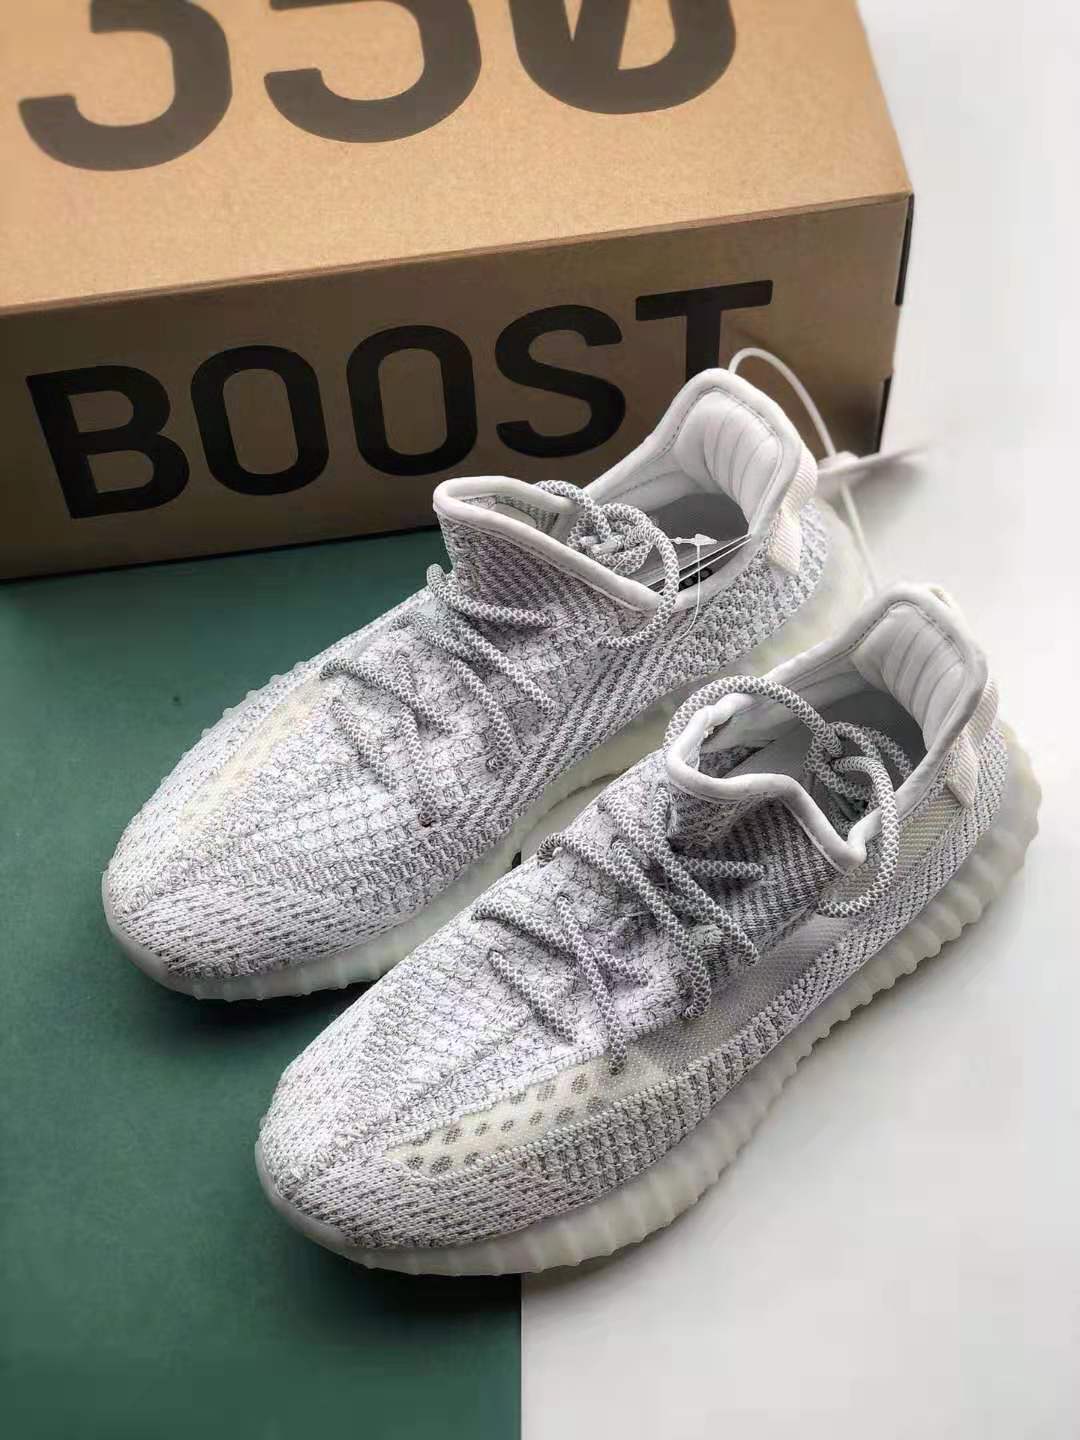 Adidas Yeezy Boost 350 V2 Static Reflective EF2367: Limited Edition Comfort and Style